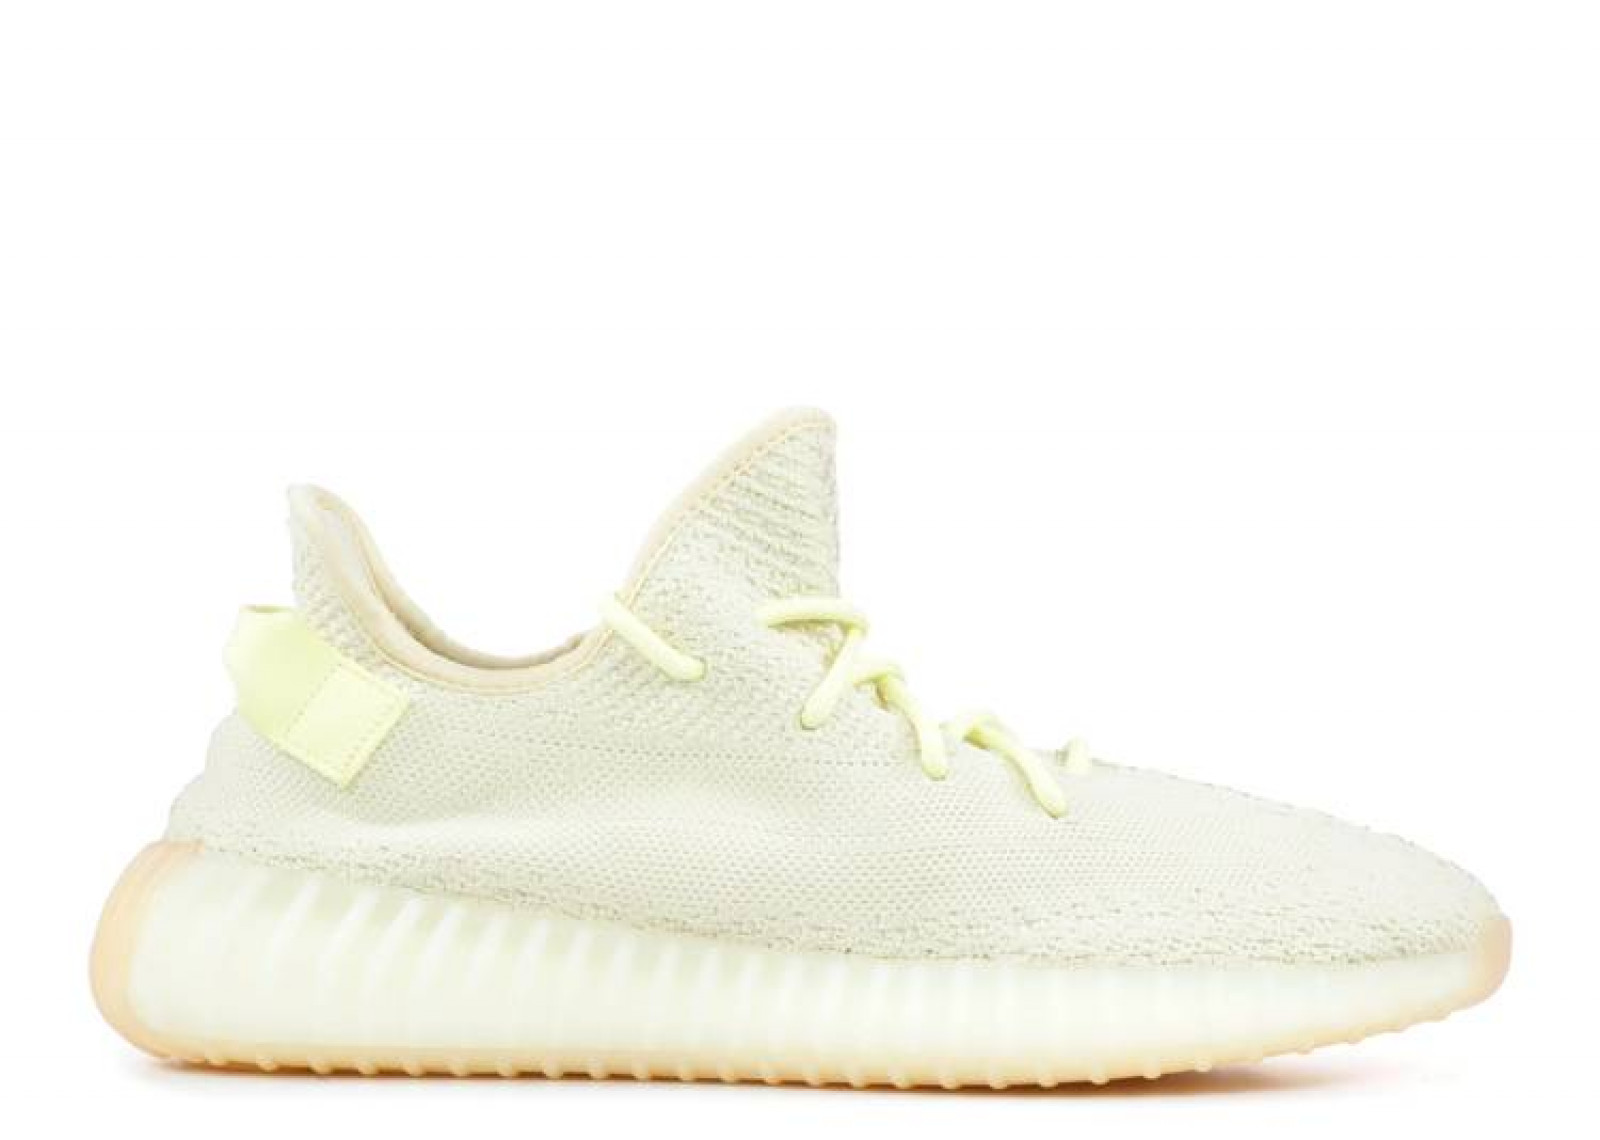 YEEZY BOOST 350 V2 BUTTER image 1